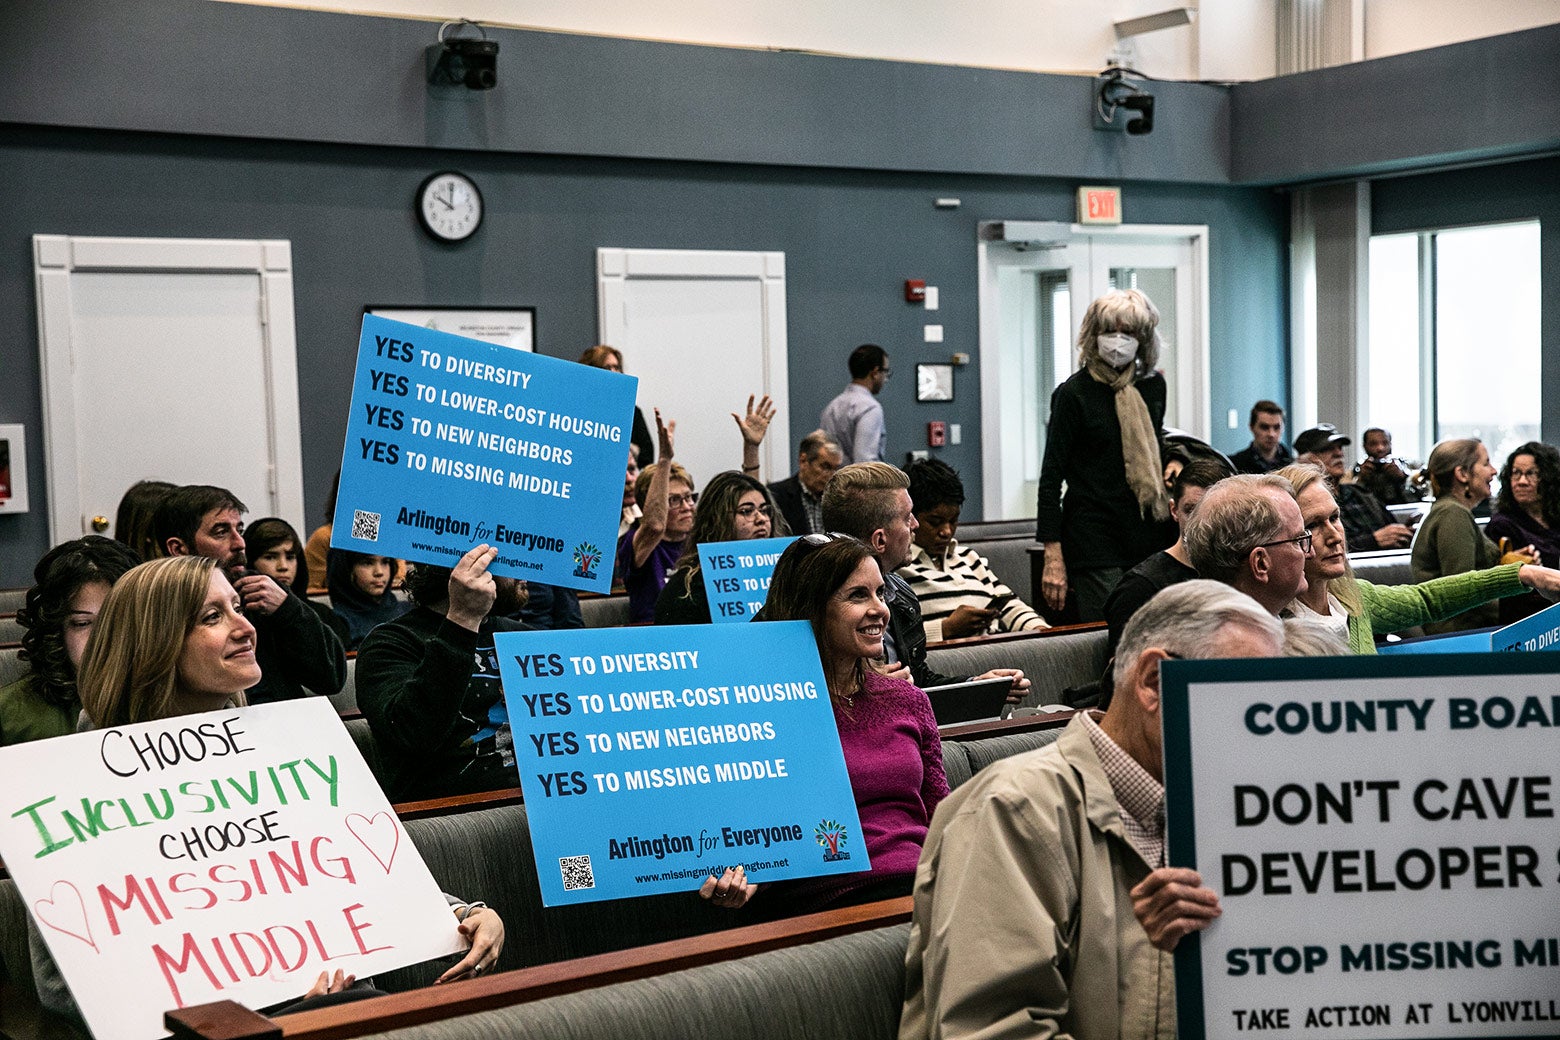 Several rows of pro–missing middle Arlington residents clutch signs that say "Choose Inclusivity: Choose Missing Middle" and "Yes to Diversity. Yes to Lower-Cost Housing."